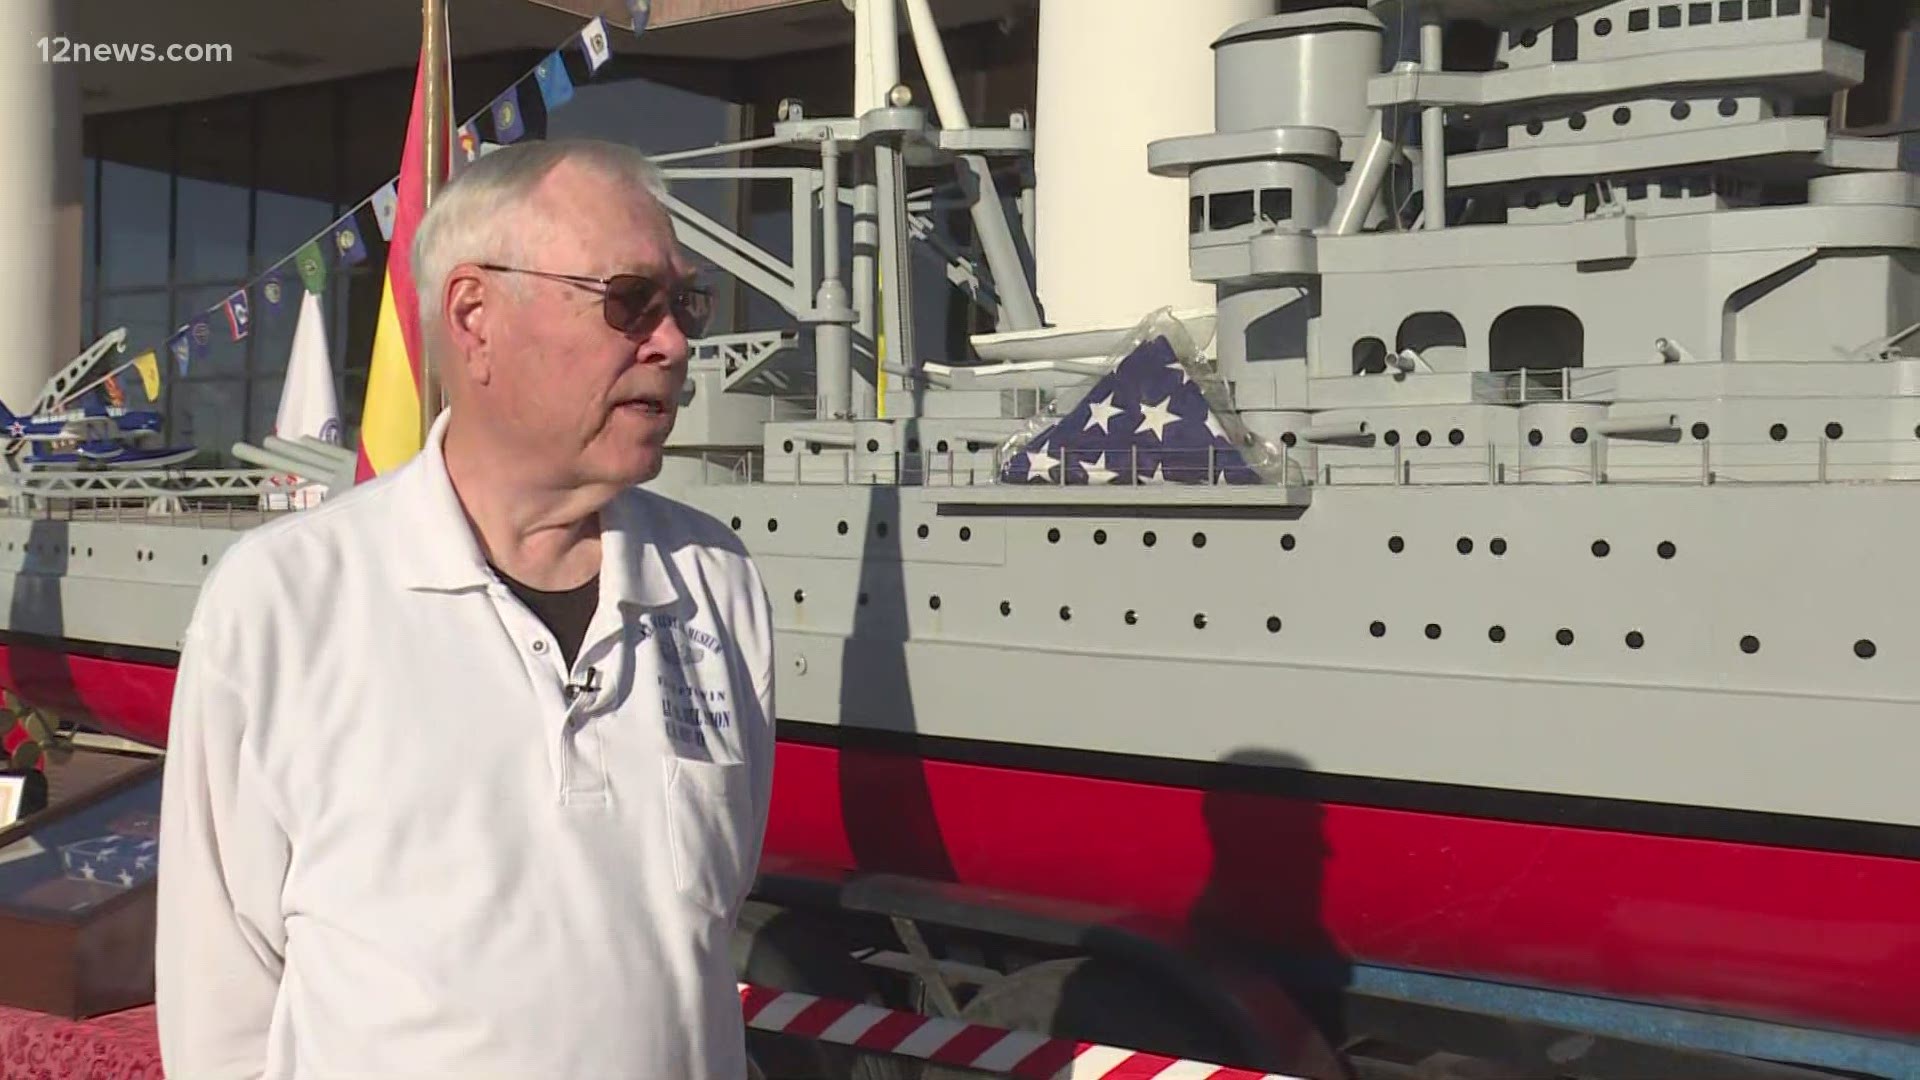 The ship, one of the largest ever built, is on display as Sanderson Ford celebrates and honors the dedication, courage, and sacrifice of those who served.